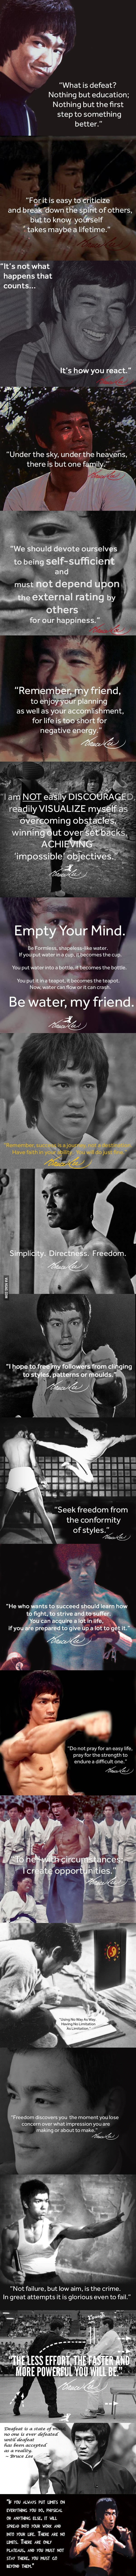 21 Powerful And Inspiring Quotes From The Legendary Bruce Lee